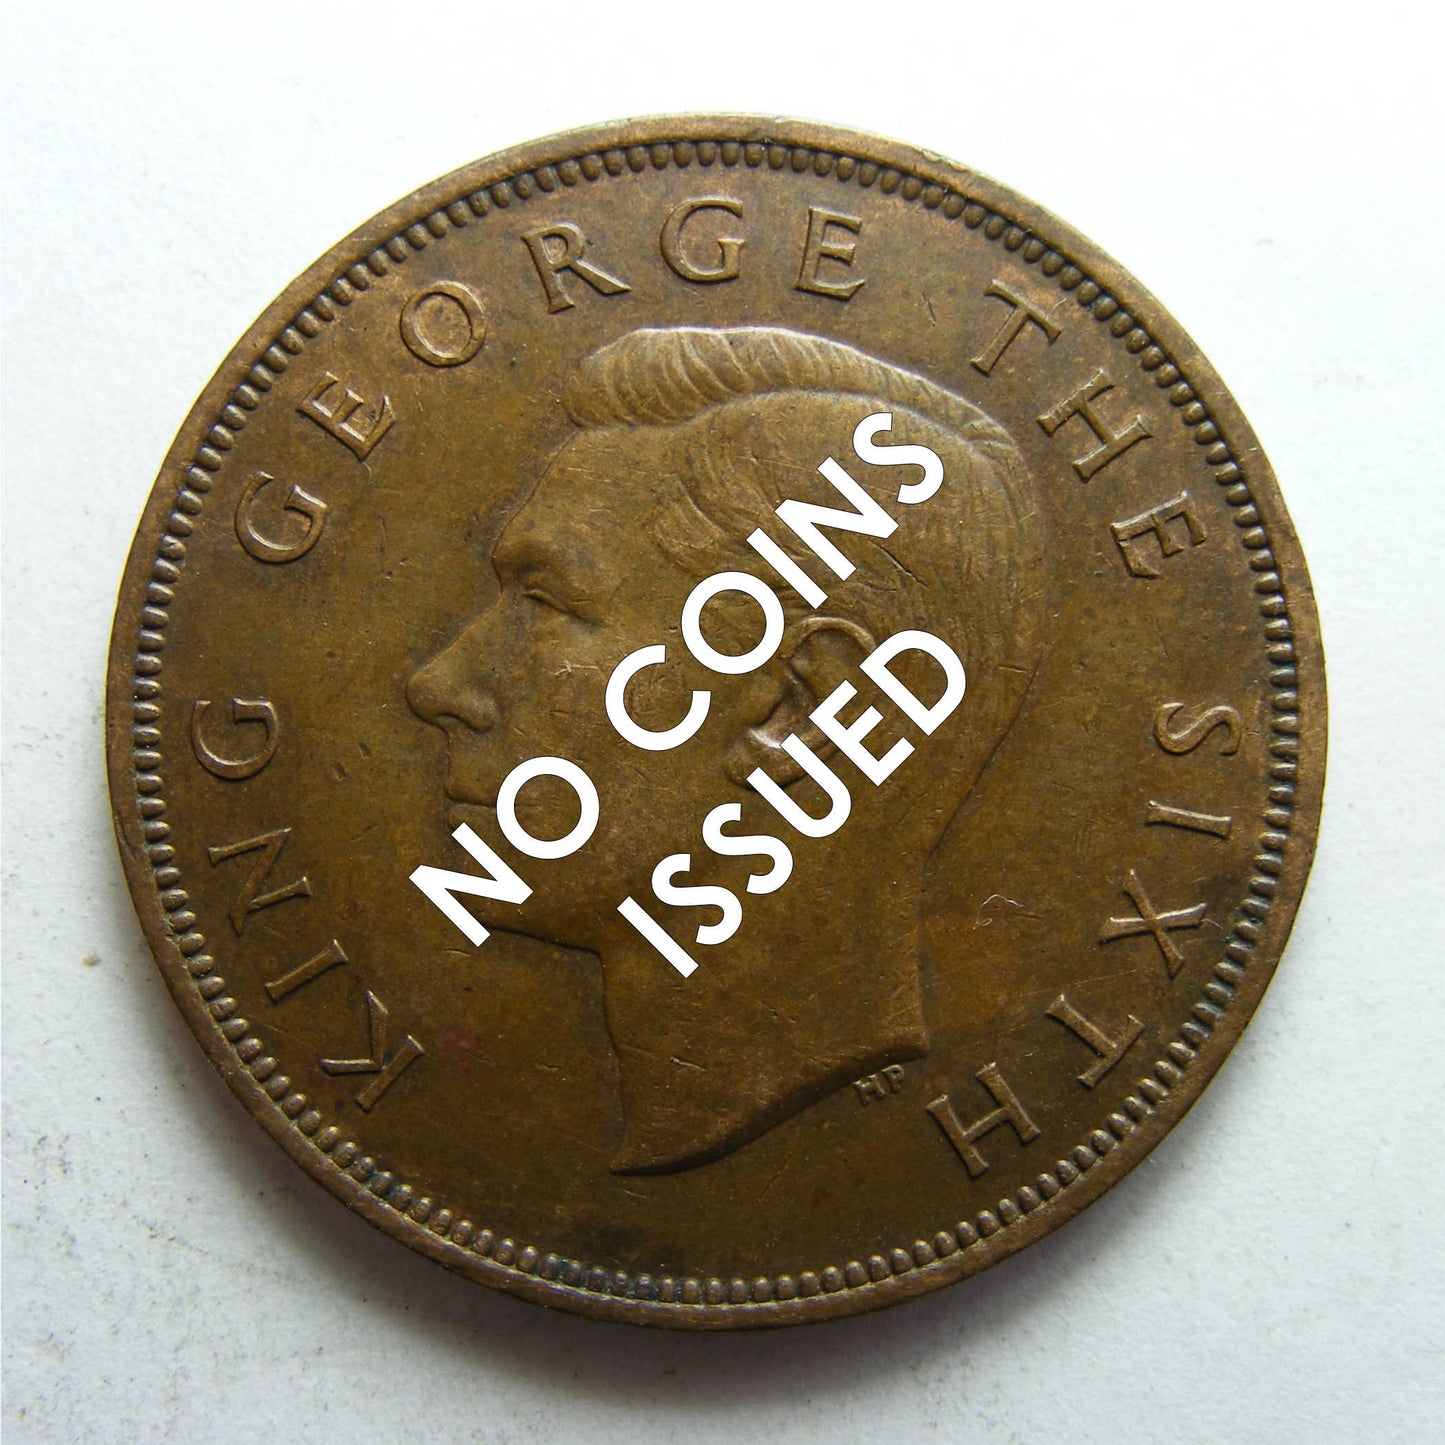 New Zealand 1937 Penny King George VI Coin